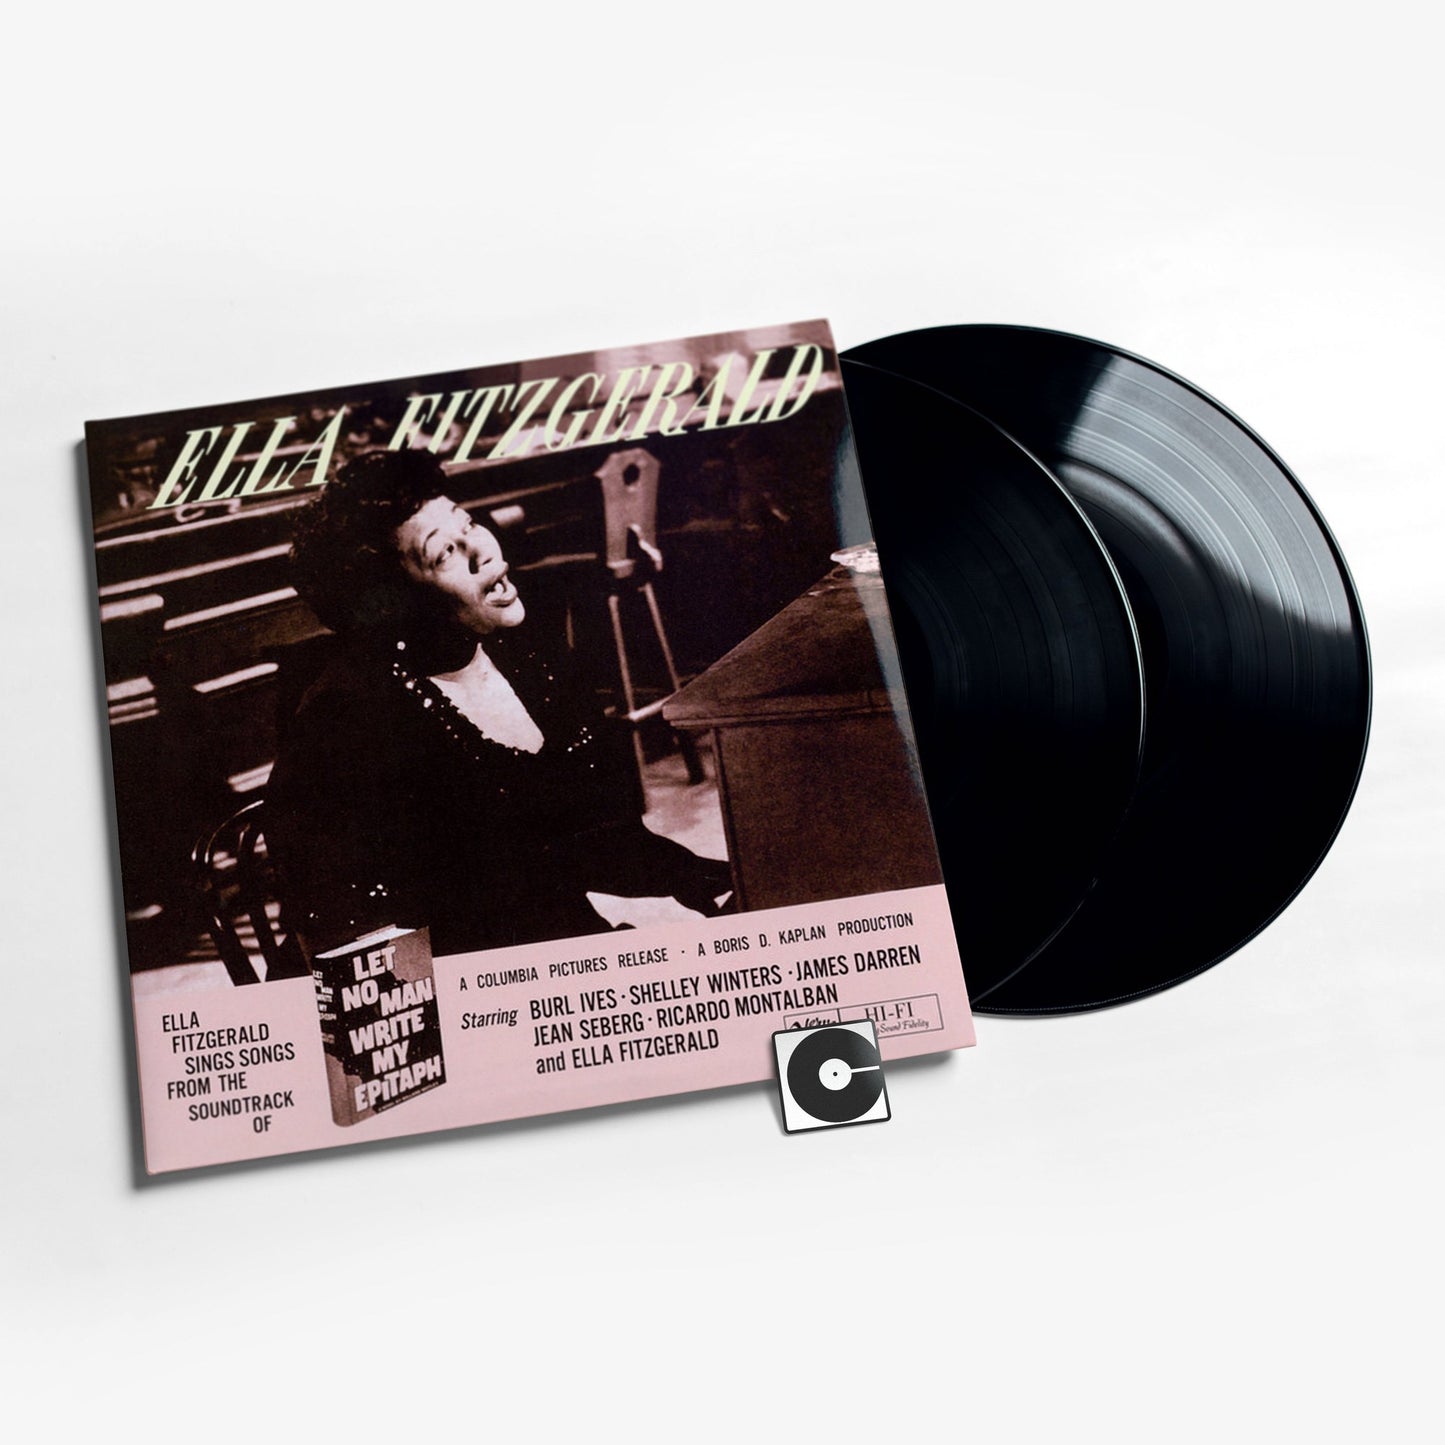 Ella Fitzgerald - "Let No Man Write My Epitaph" Analogue Productions